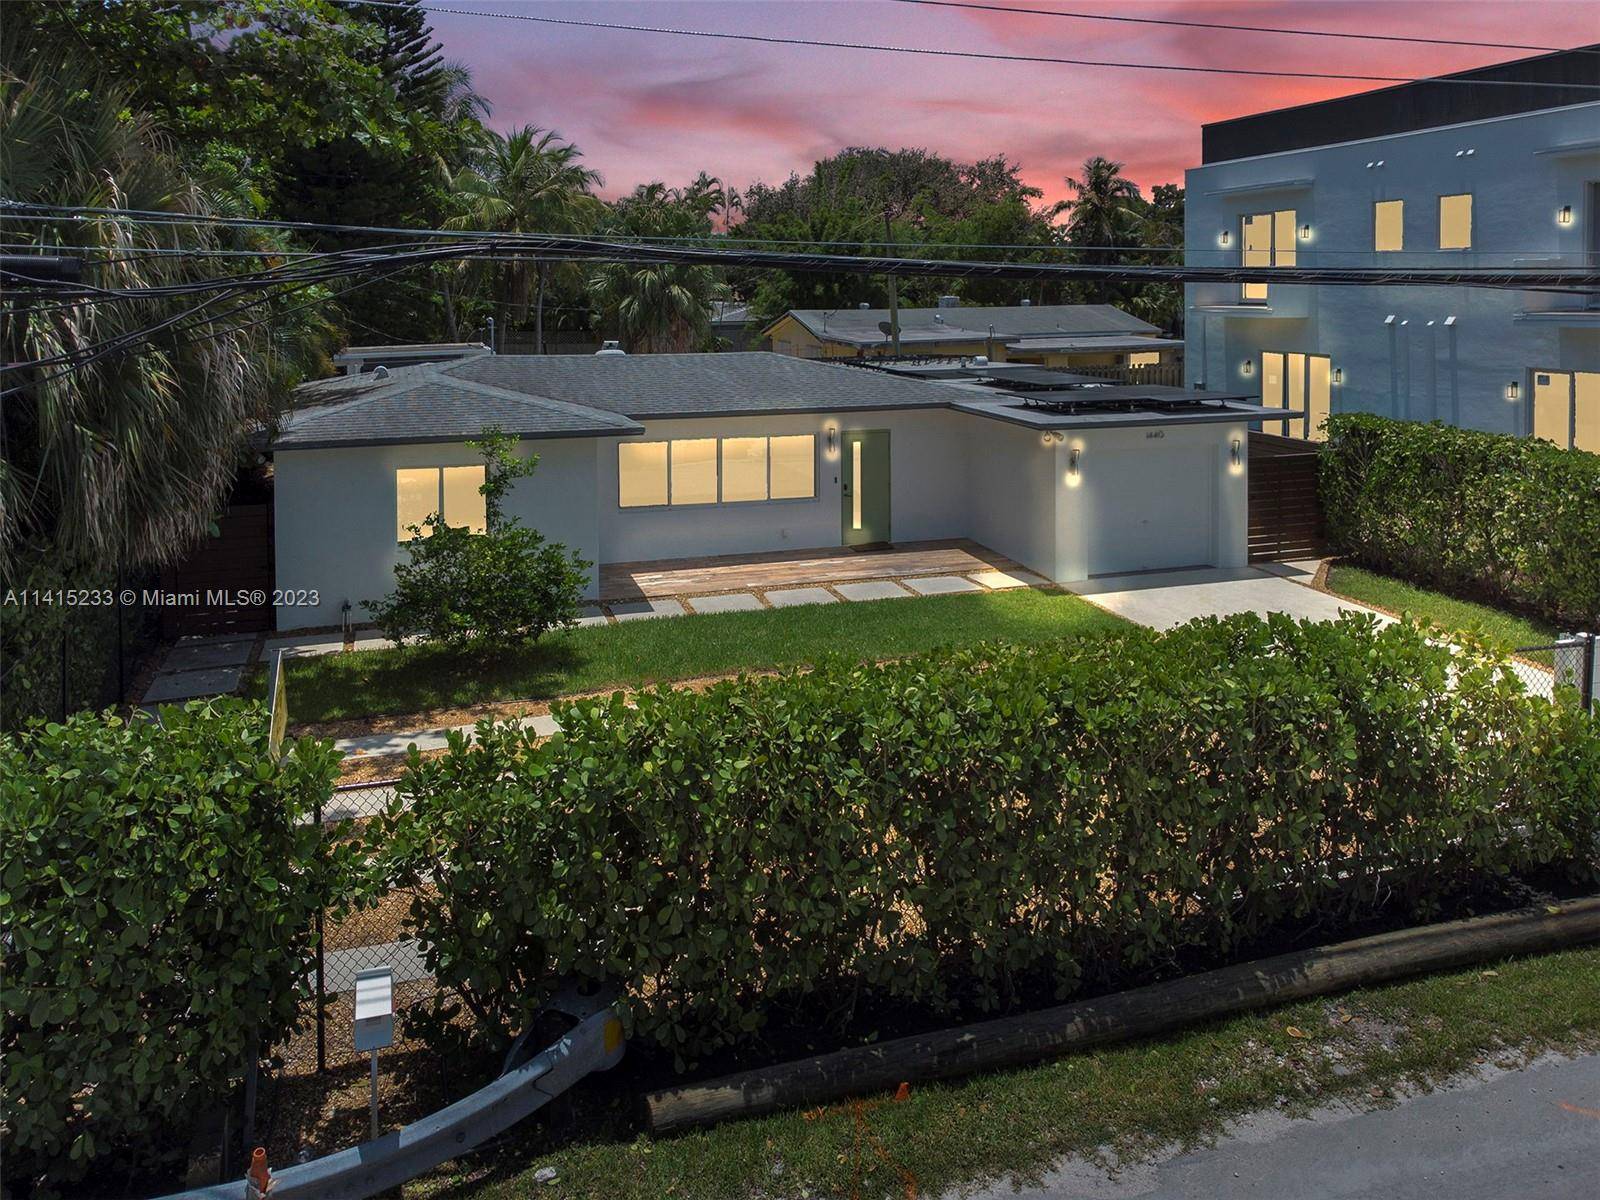 Mid Century Modern Smart Ready Home, completely updated with 3 Bedrooms, 2 Bathrooms and Pool located in one of the most sought after neighborhoods of Fort Lauderdale.